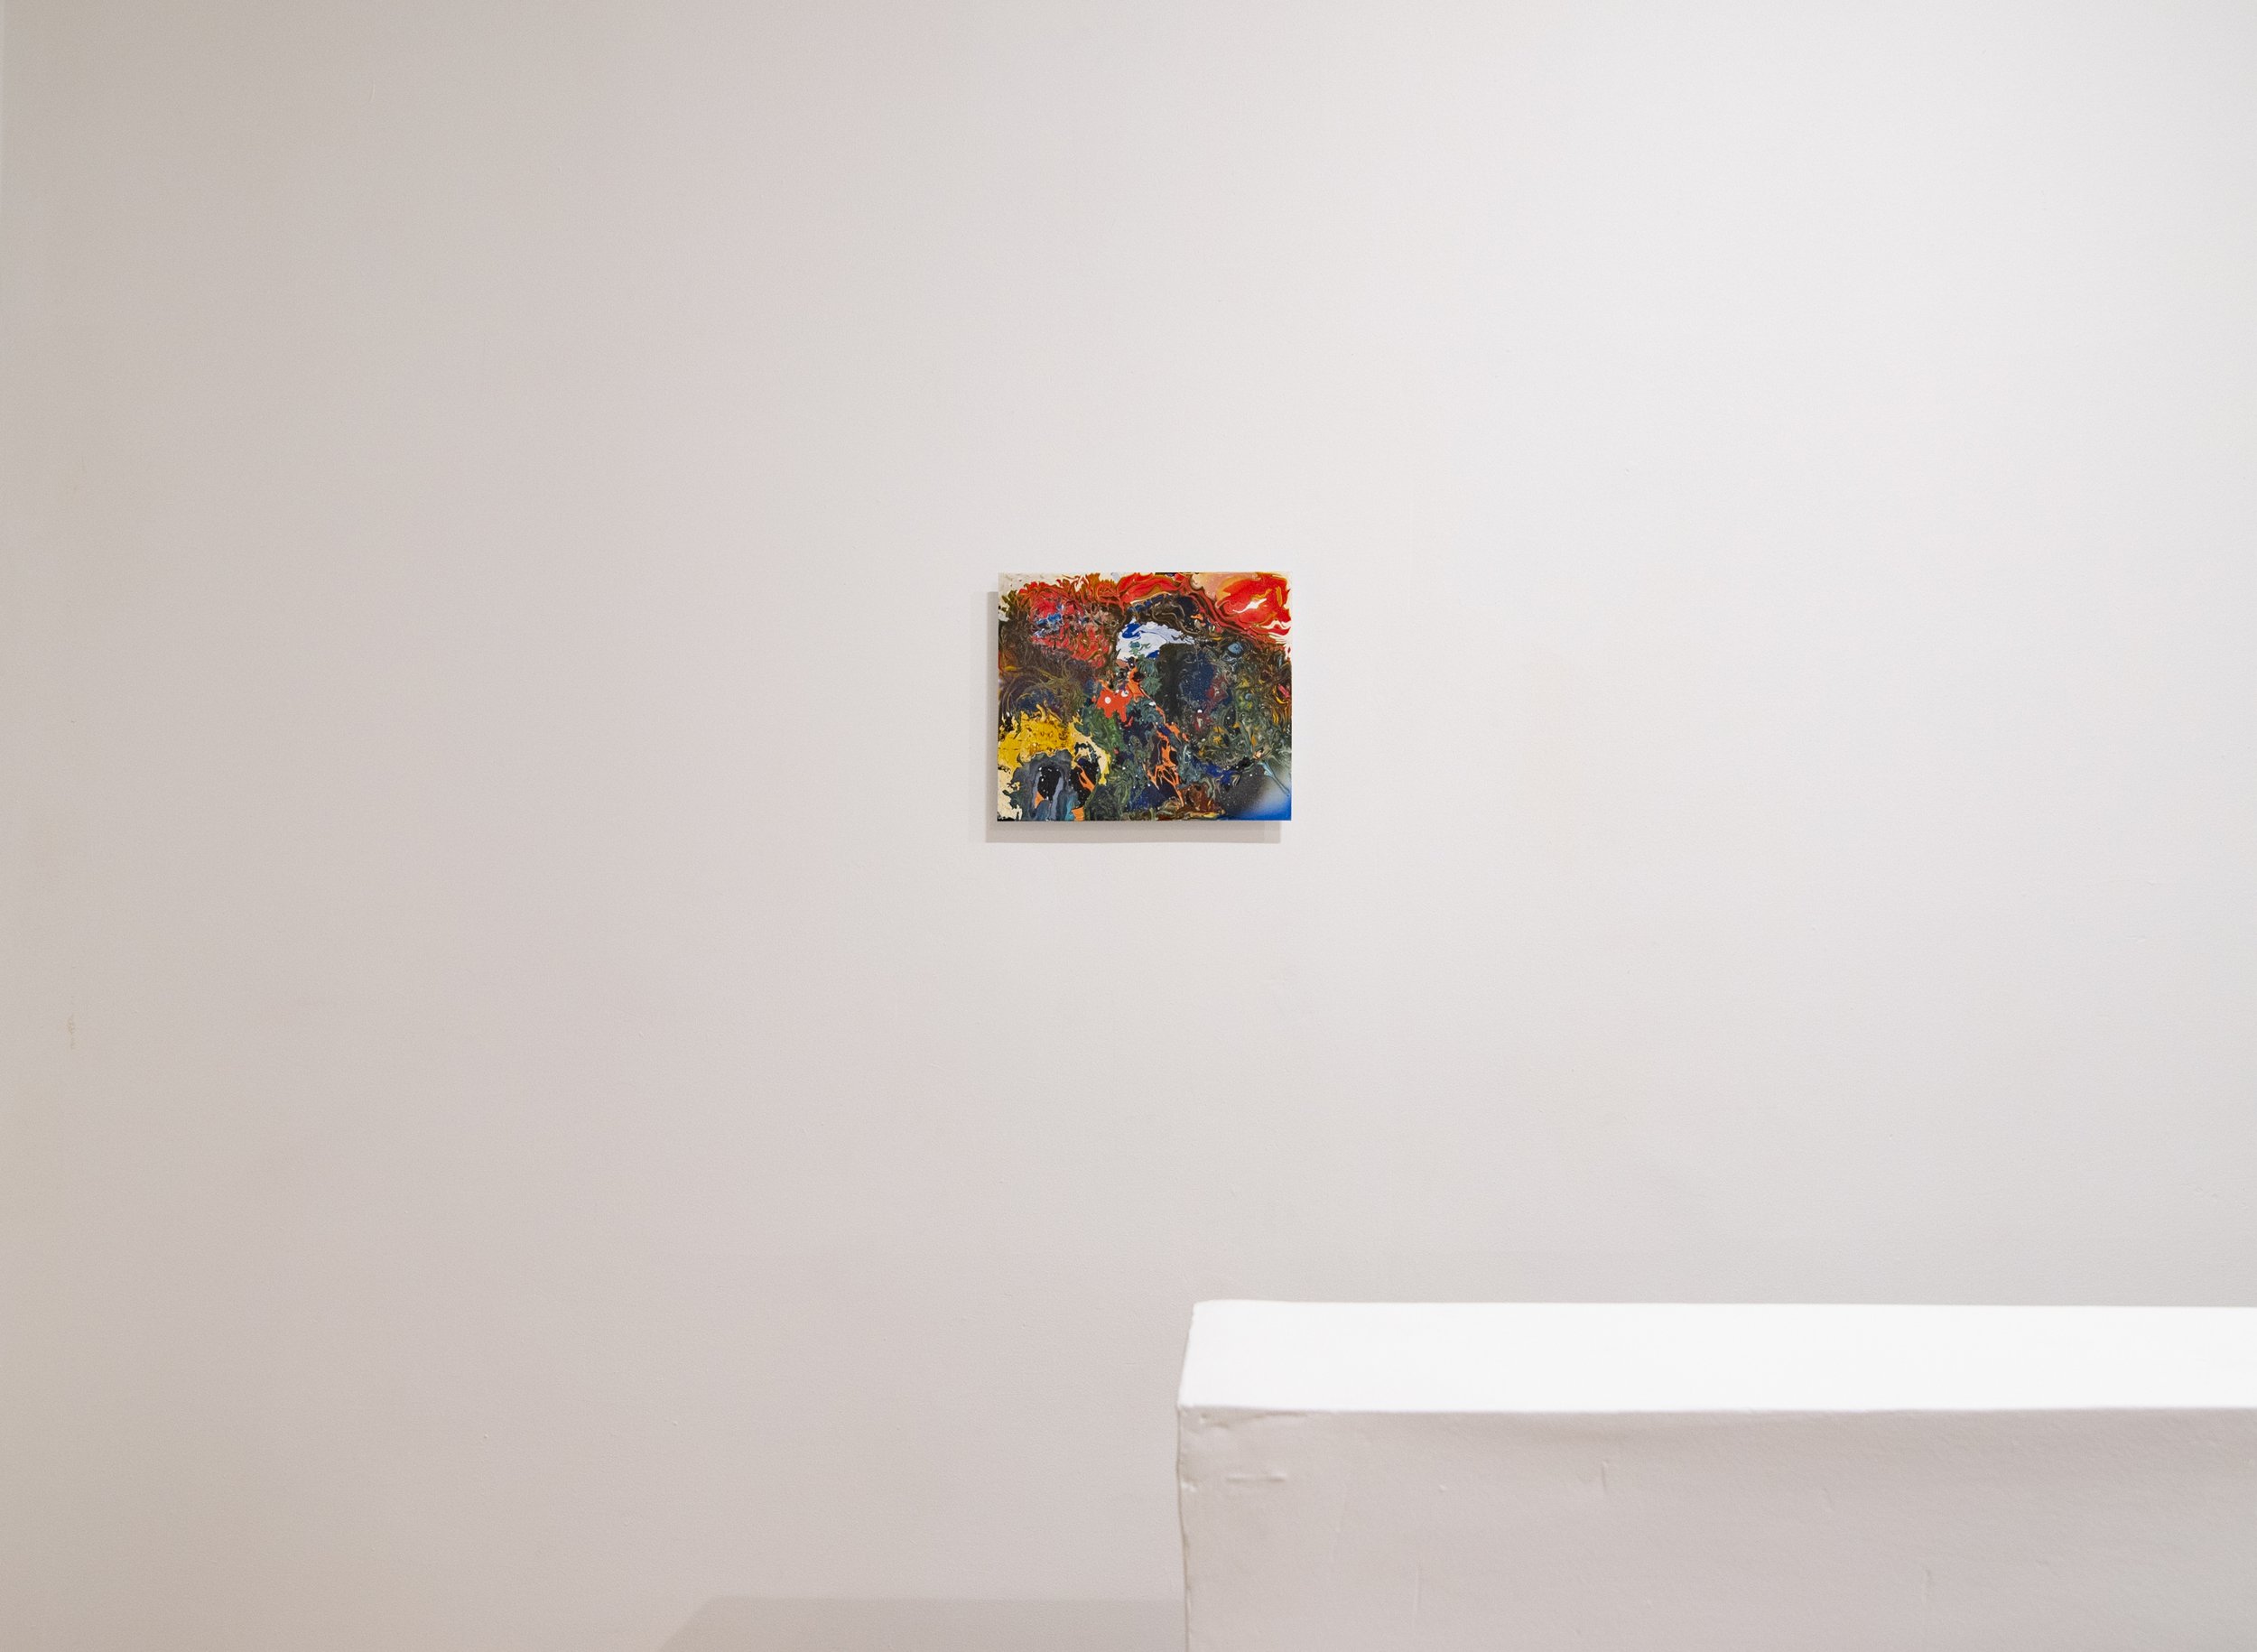 Dave Bopp: Fear of the Invisible - Installation image 2022 - Cindy Rucker Gallery (Copy)